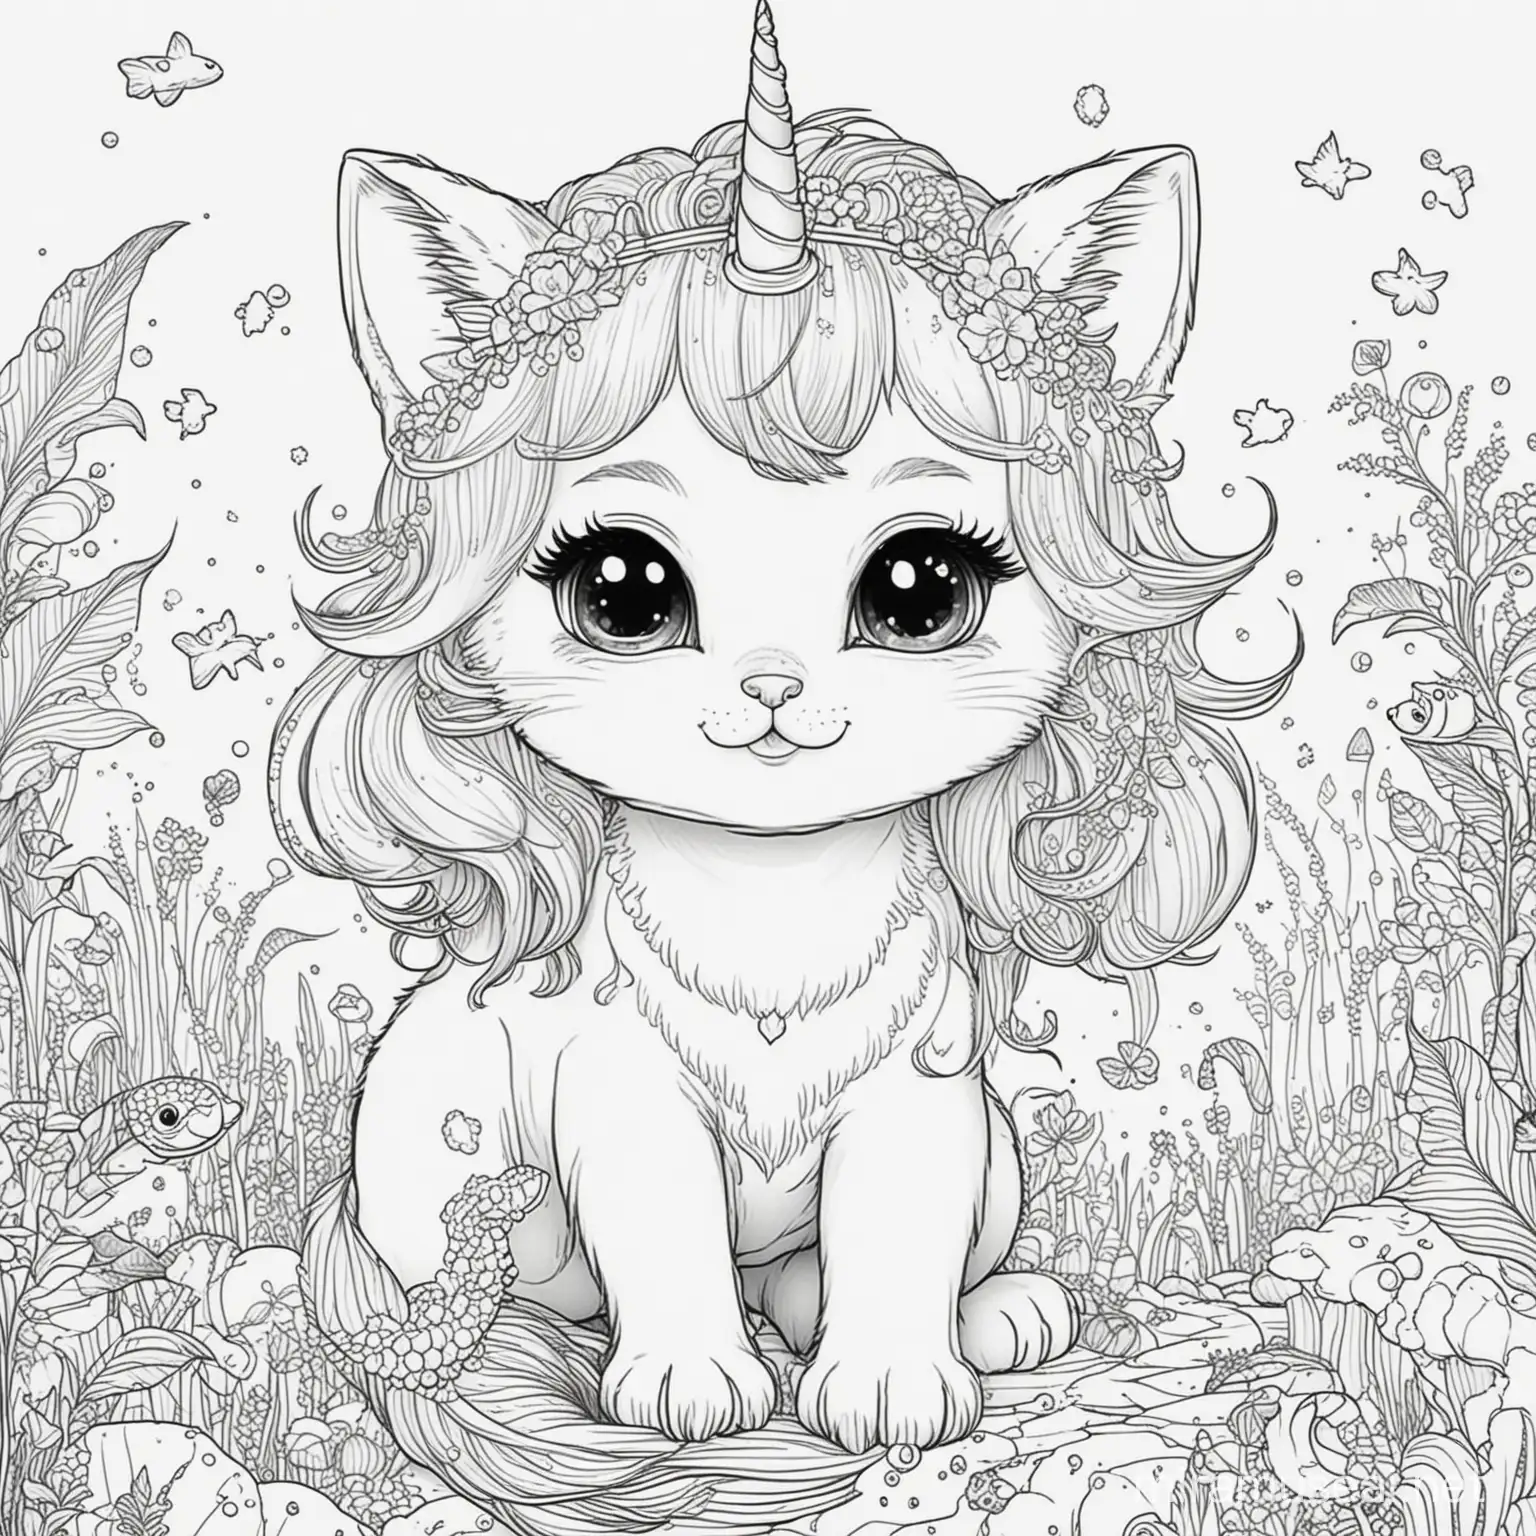 Cartoonish Cute Kitten with Mythical Mermaid and Unicorn Traits for Kids 45 Aspect Ratio